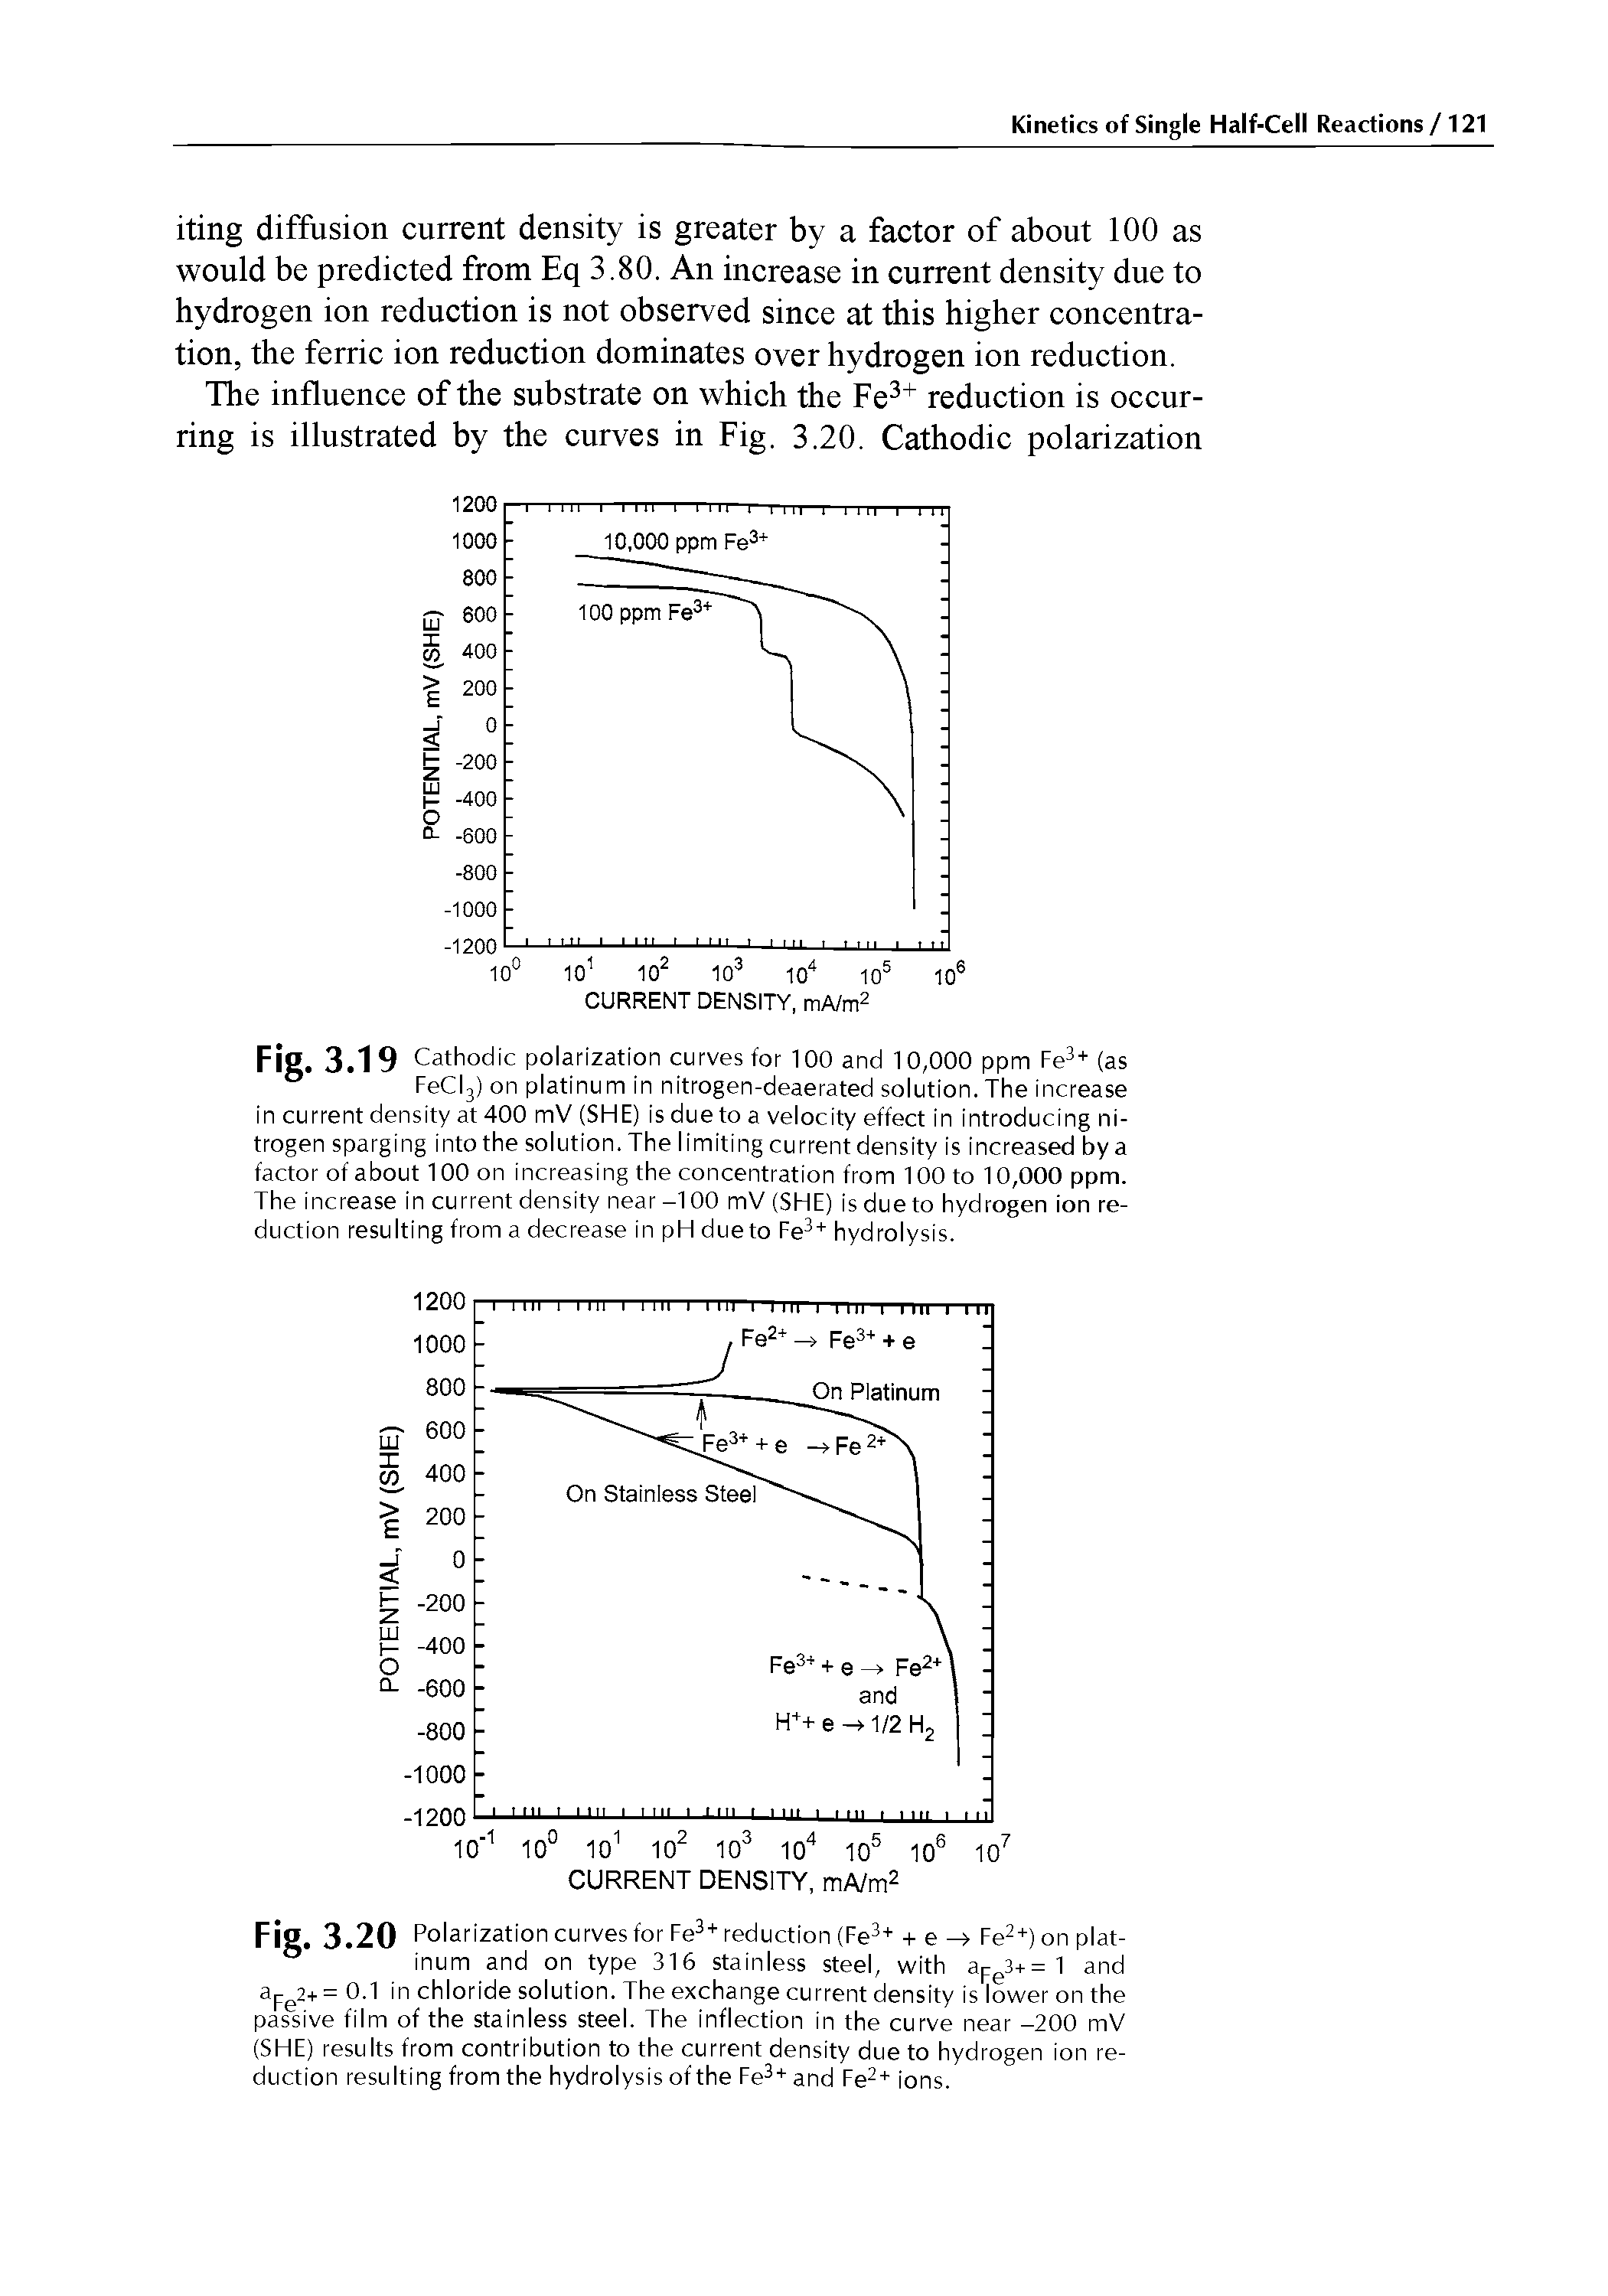 Fig. 3.19 Cathodic polarization curves for 100 and 10,000 ppm Fe3+ (as FeCI3) on platinum in nitrogen-deaerated solution. The increase in current density at 400 mV (SHE) is due to a velocity effect in introducing nitrogen sparging into the solution. The limiting current density is increased by a factor of about 100 on increasing the concentration from 100 to 10,000 ppm. The increase in current density near-100 mV (SHE) is due to hydrogen ion reduction resulting from a decrease in pH dueto Fe3+ hydrolysis.